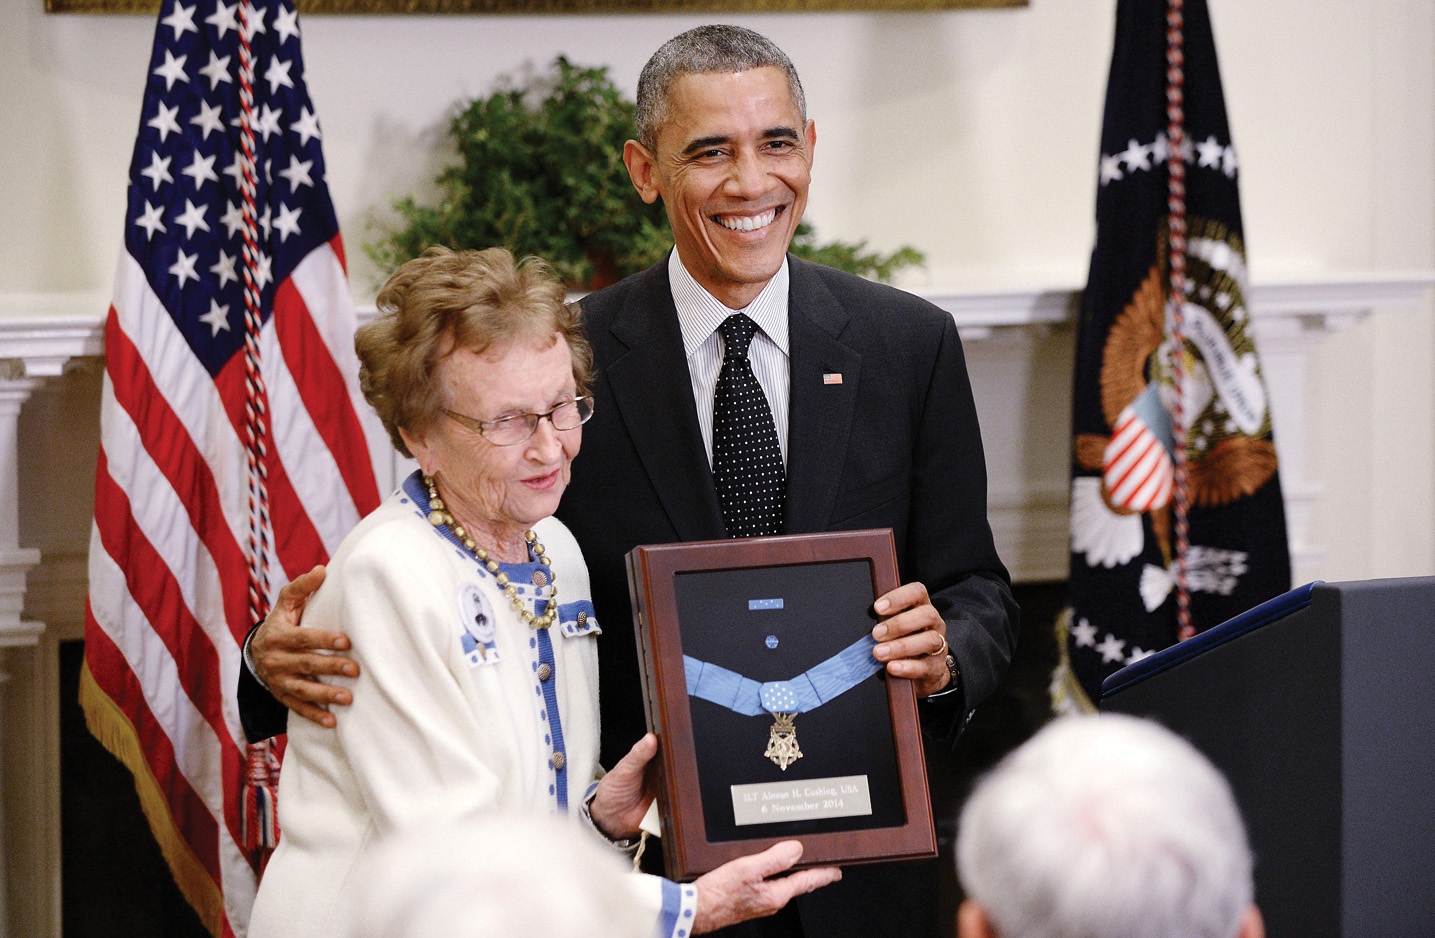 President Barack Obama presented the Medal of Honor to Cushing's descendents in a 2014 ceremony at the White House.